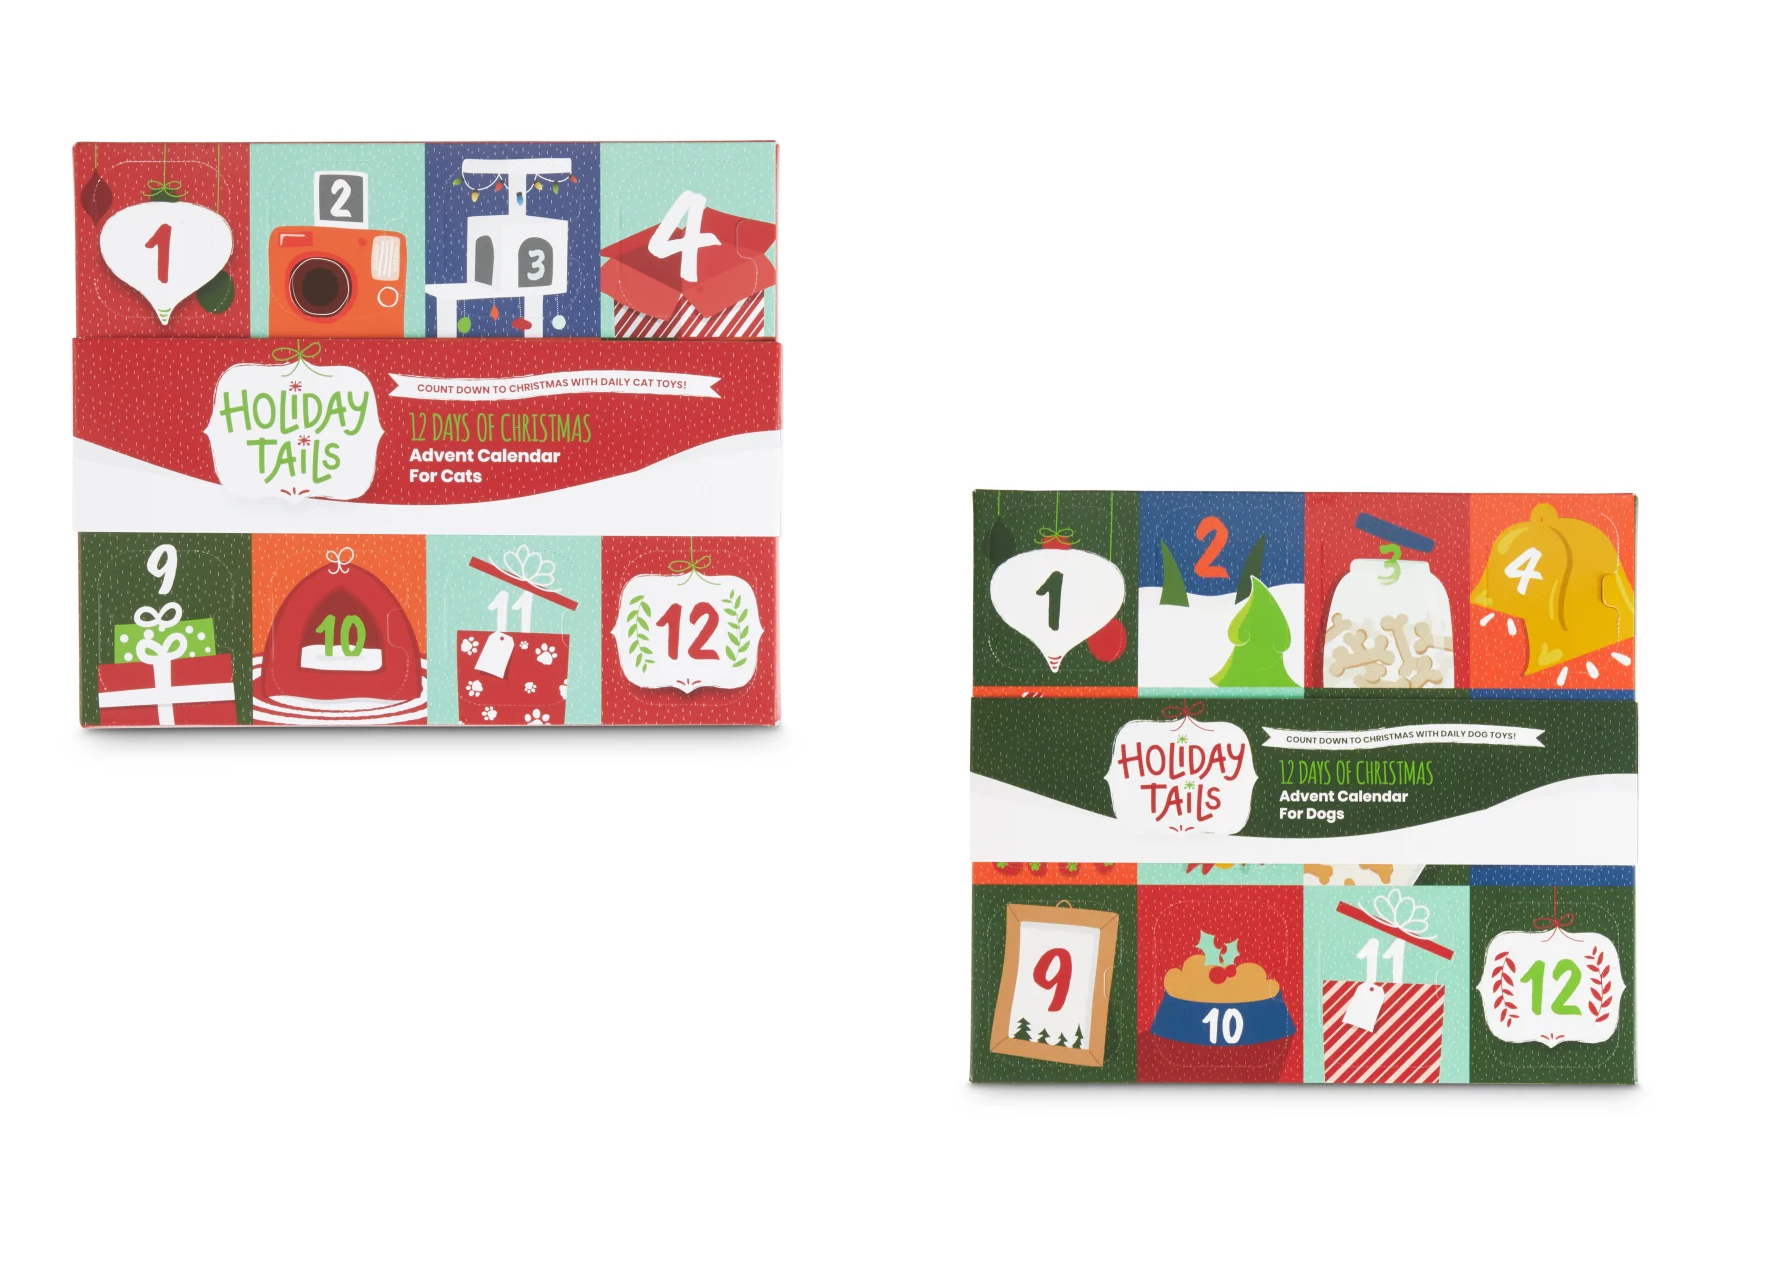 2020 Petco Advent Calendars for Dogs & Cats Available Now! Hello